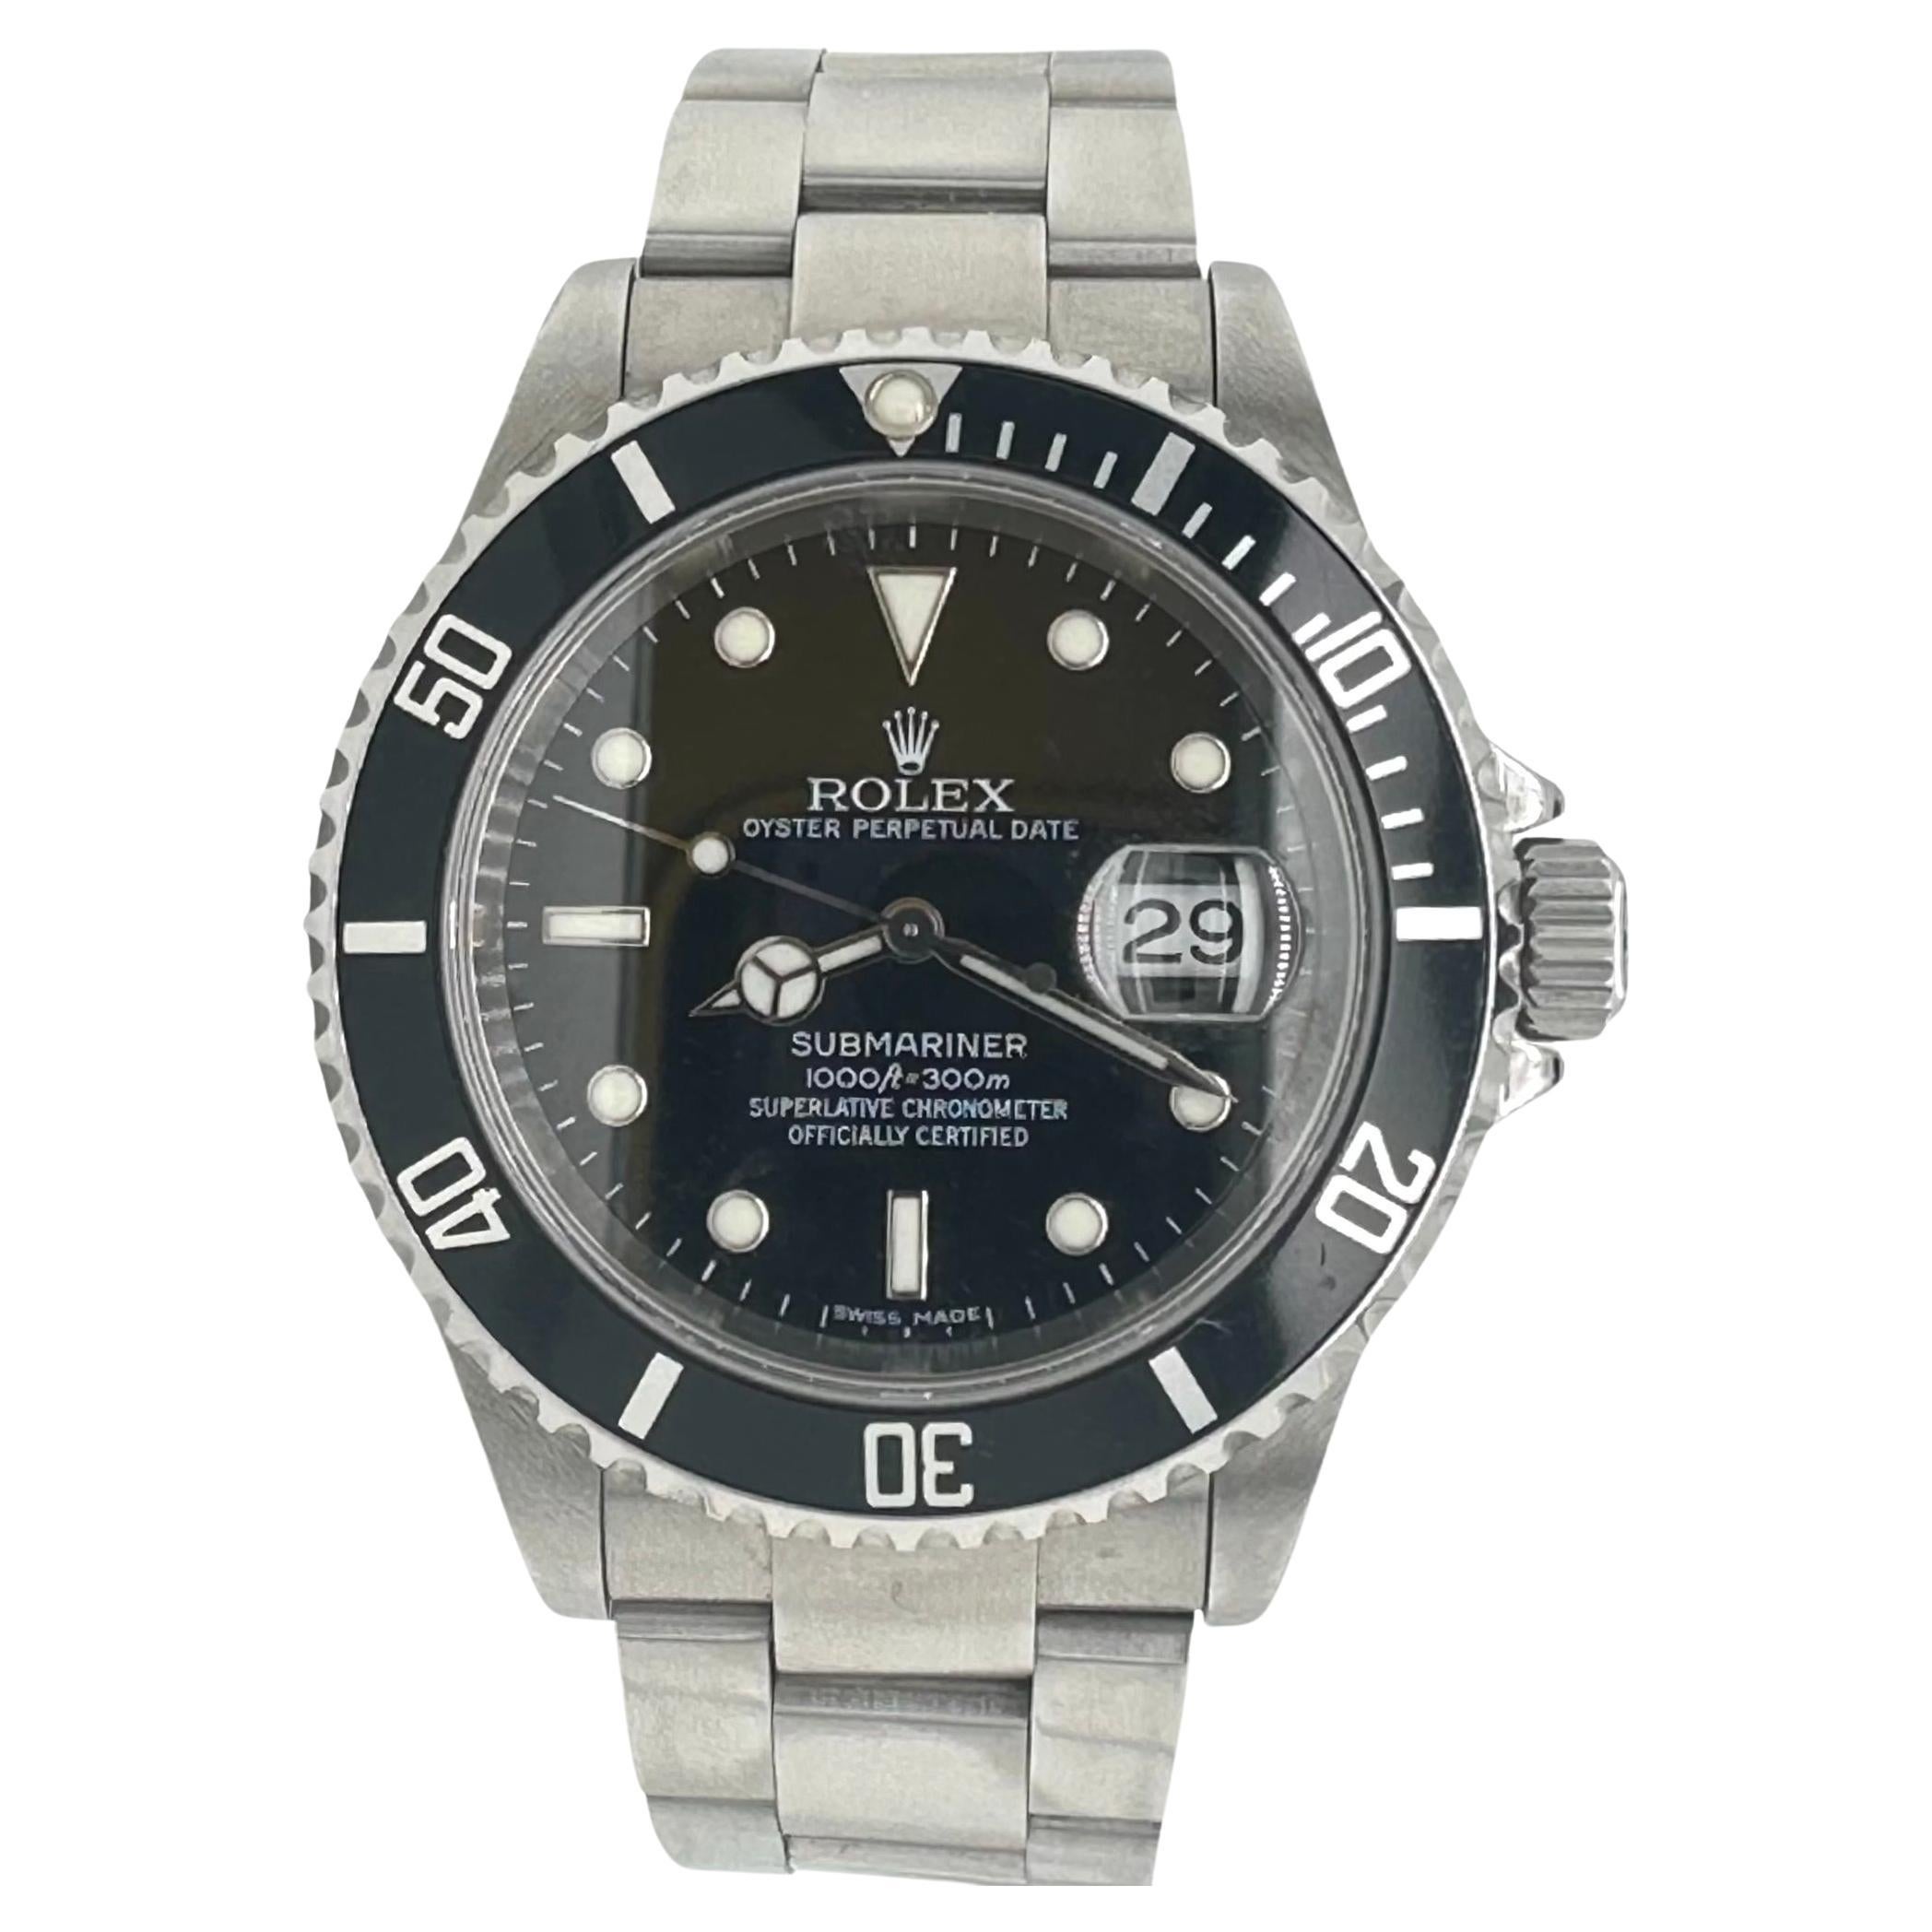 Rolex Submariner Date 16610 Stainless Steel Watch For Sale